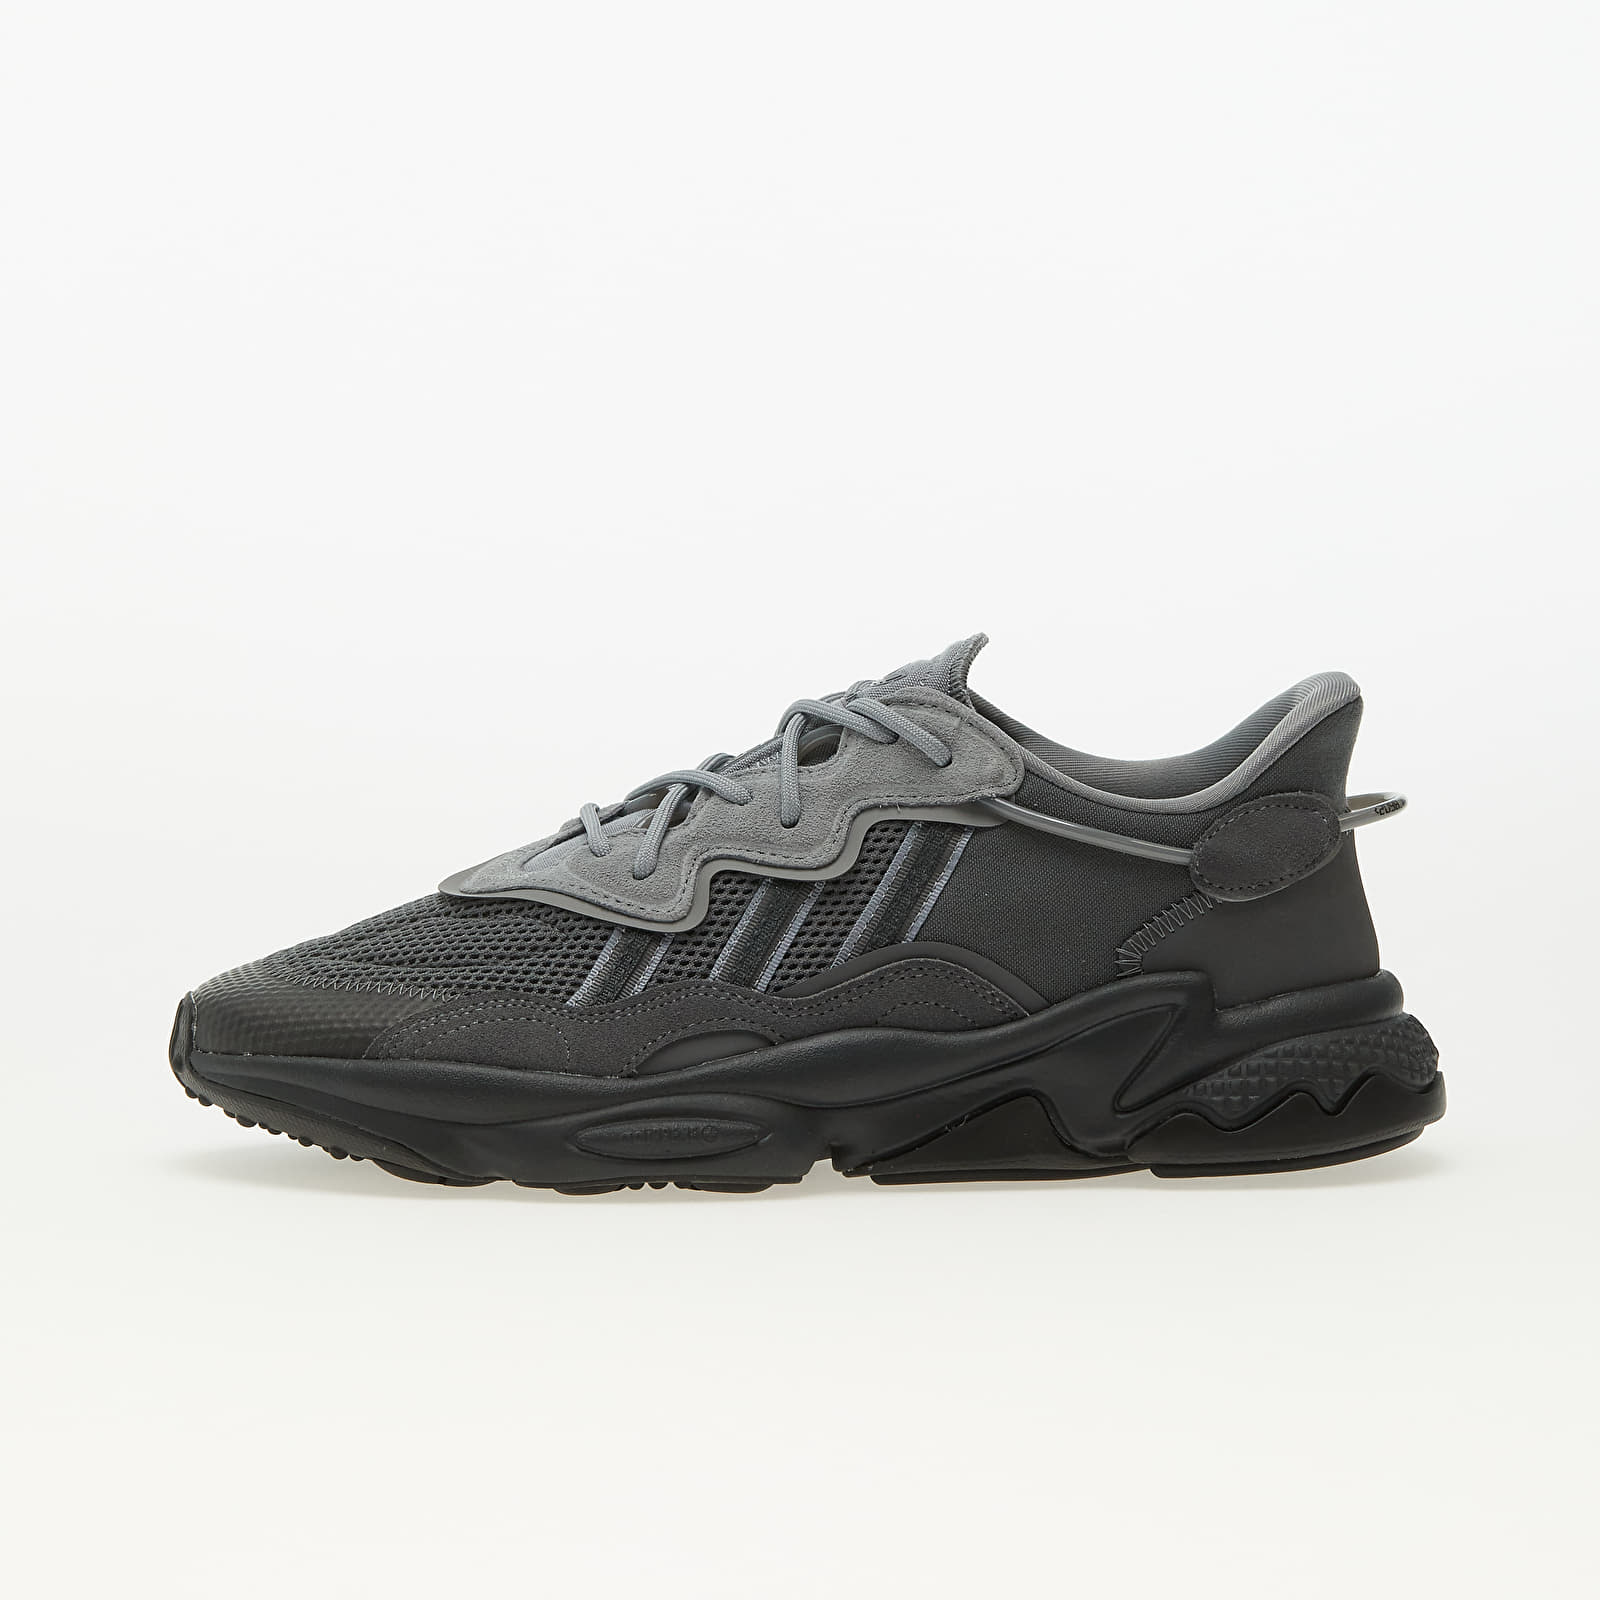 Chaussures et baskets homme adidas Ozweego Grey Five/ Grey Four/ Core Black